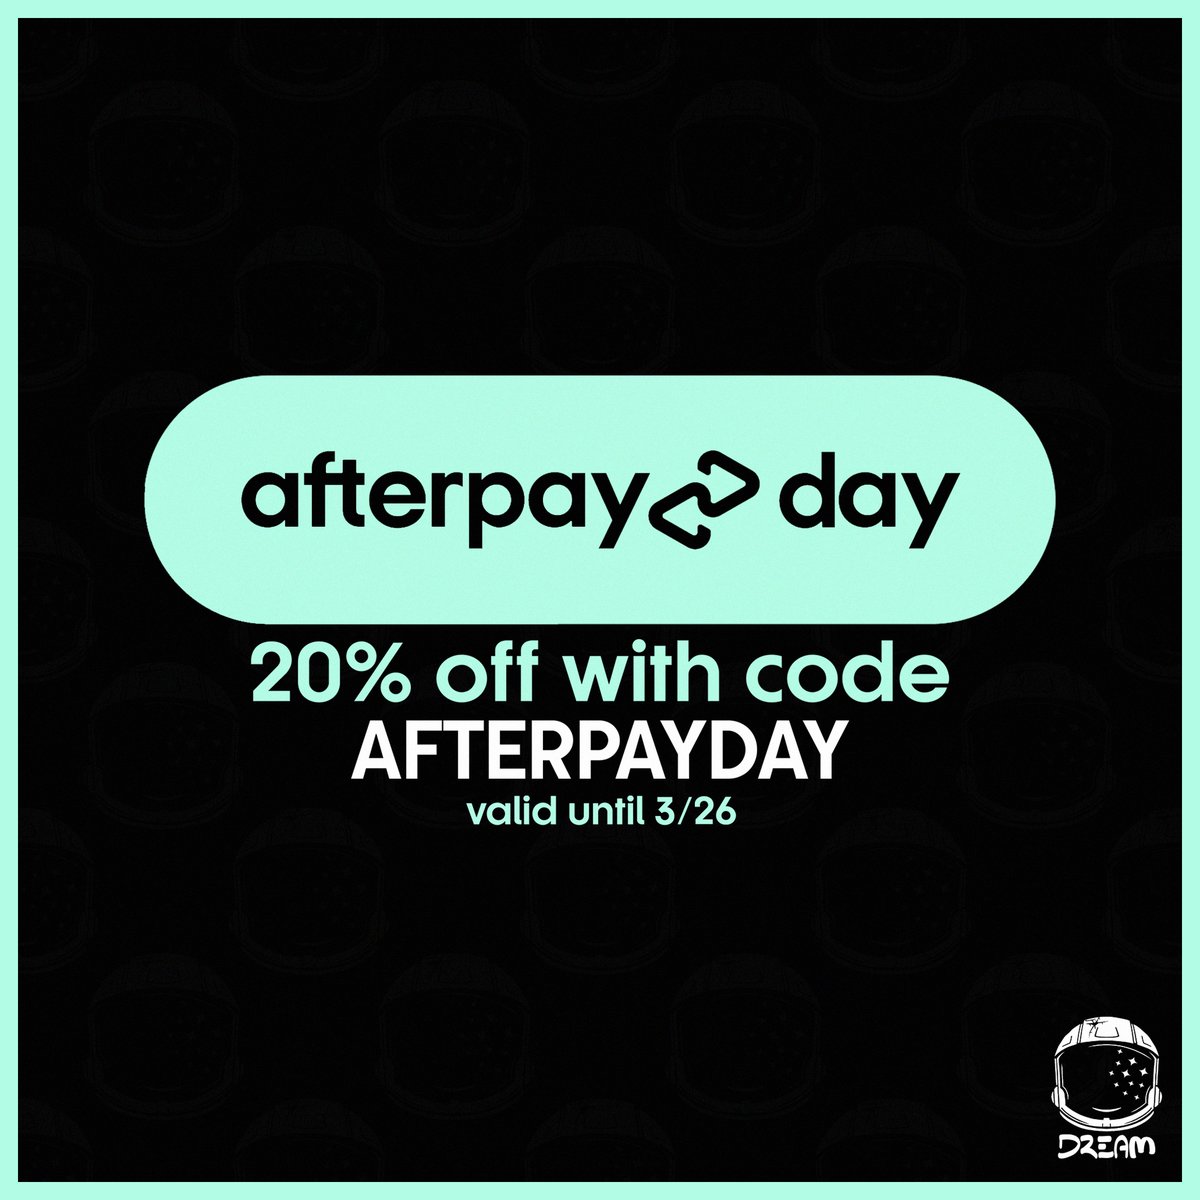 We are celebrating #AfterPayDay!!!! Use code Afterpayday for 20% off all apparel until 3/26.

dreamclothinghq.com